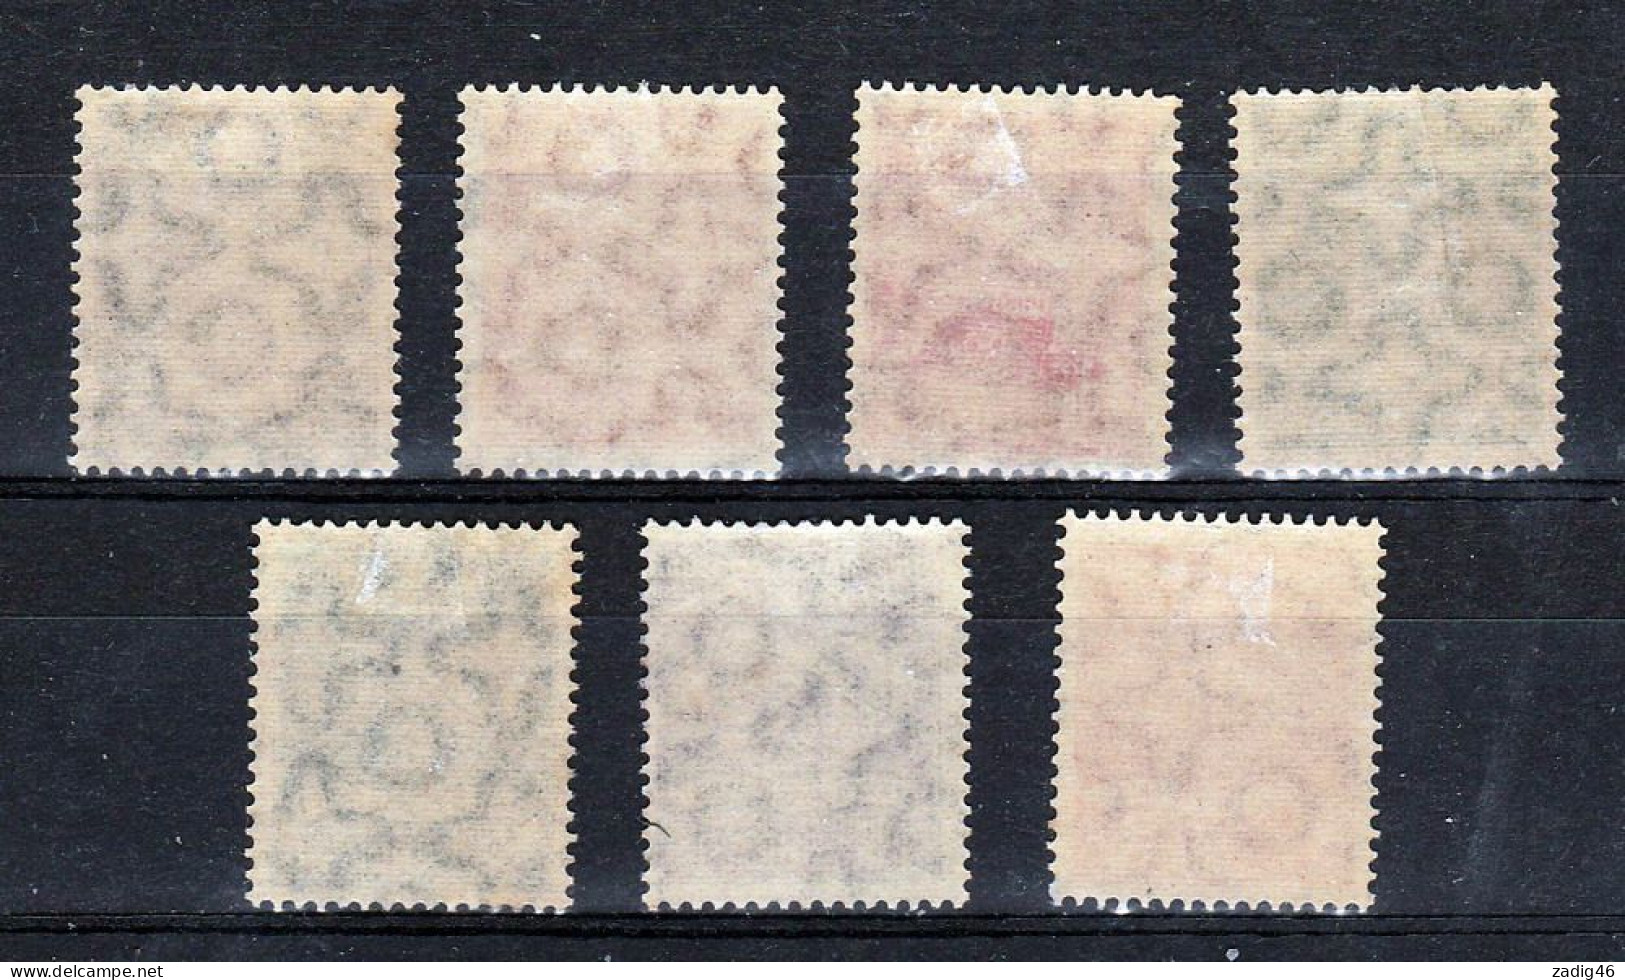 BRESIL - COMPAGNIE CONDOR - TIMBRES N° 1 A 7 - NEUFS AVEC INFIMES TRACES DE CHARNIERES A PEINE VISIBLES - Luchtpost (private Maatschappijen)